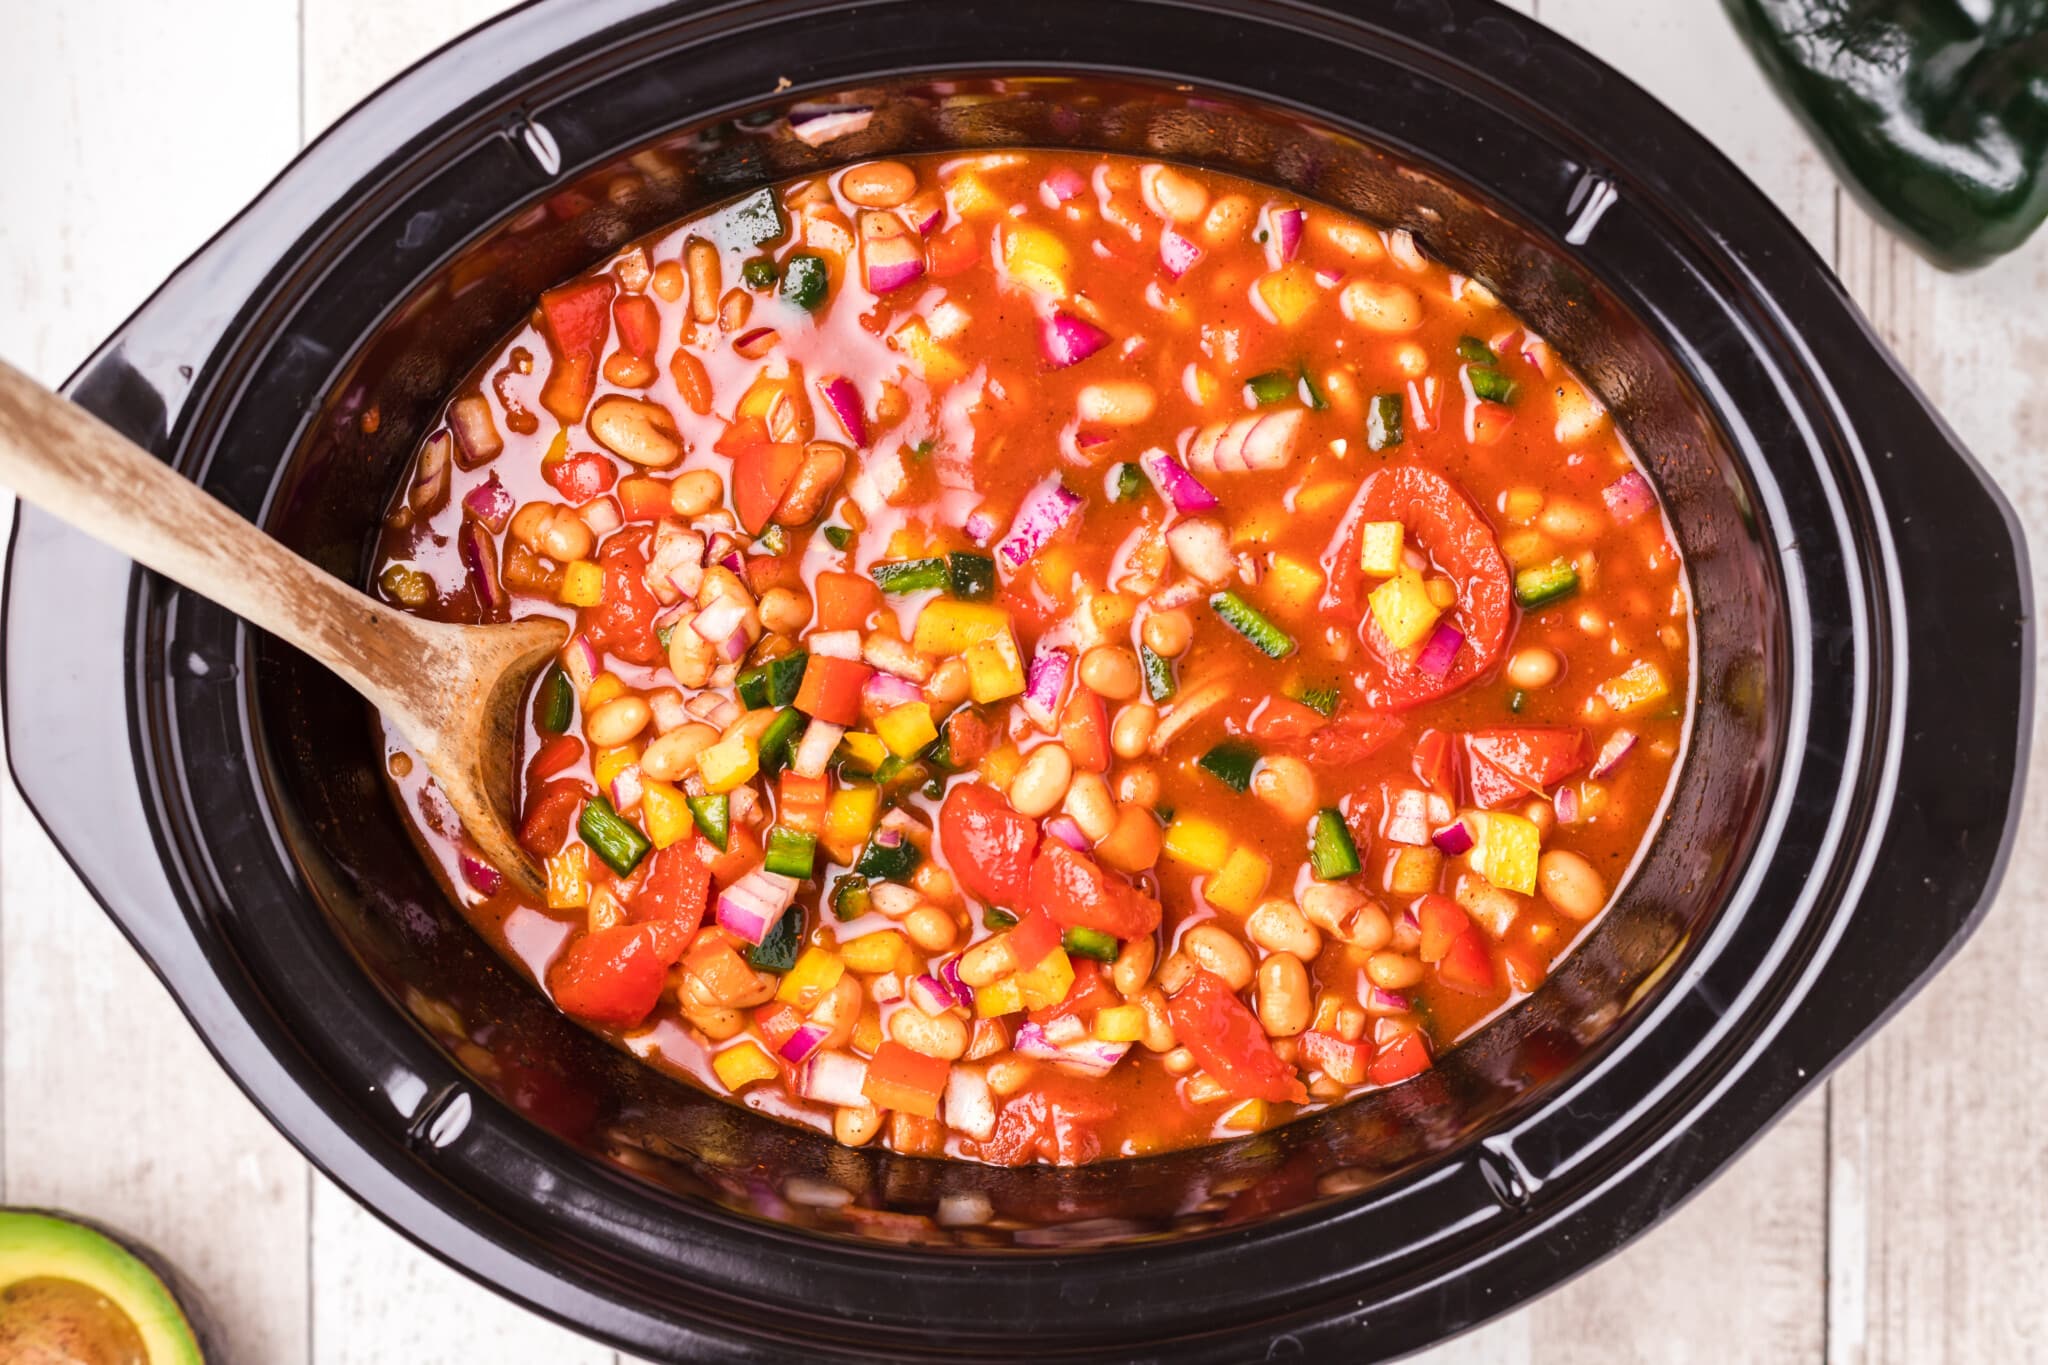 vegetarian chili in slow cooker before being cooked.